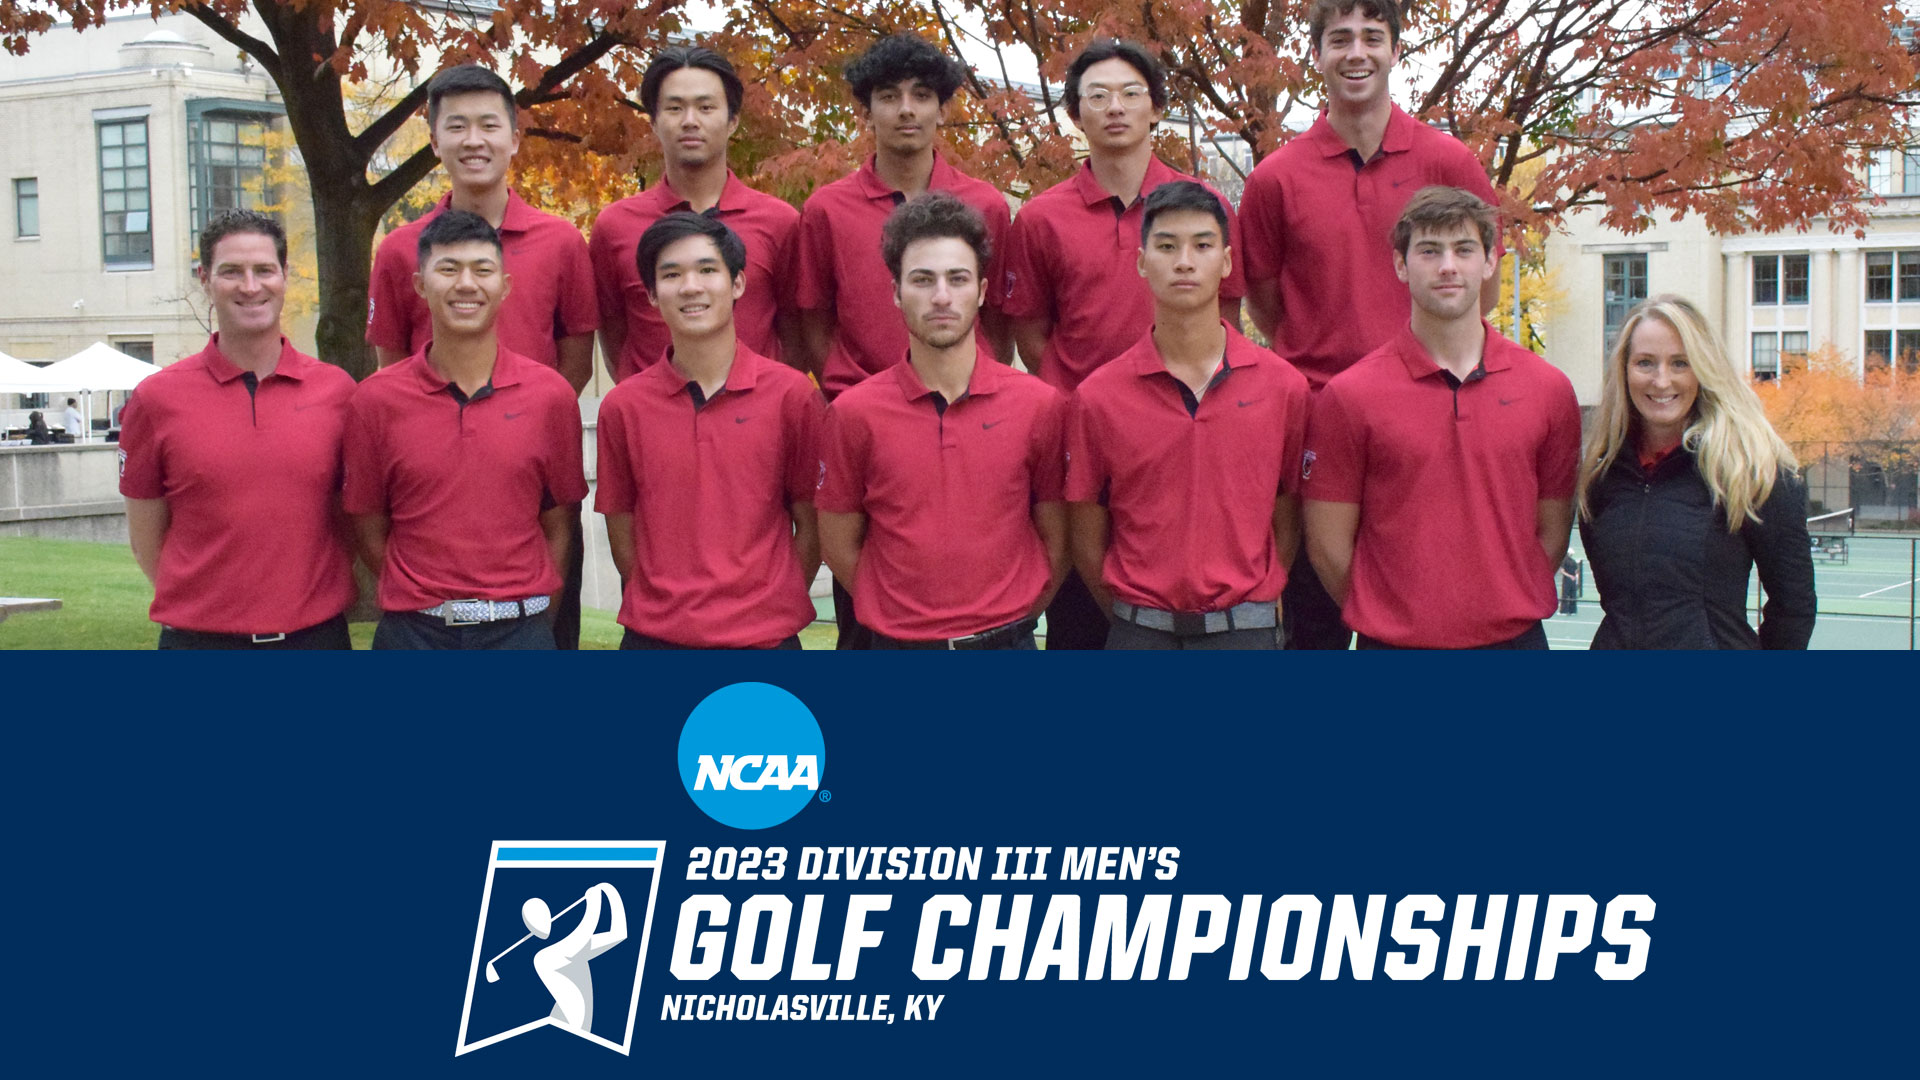 group photo of men's golf team standing in two rows wearing red shirts with the NCAA Men's Golf Championship logo at the bottom